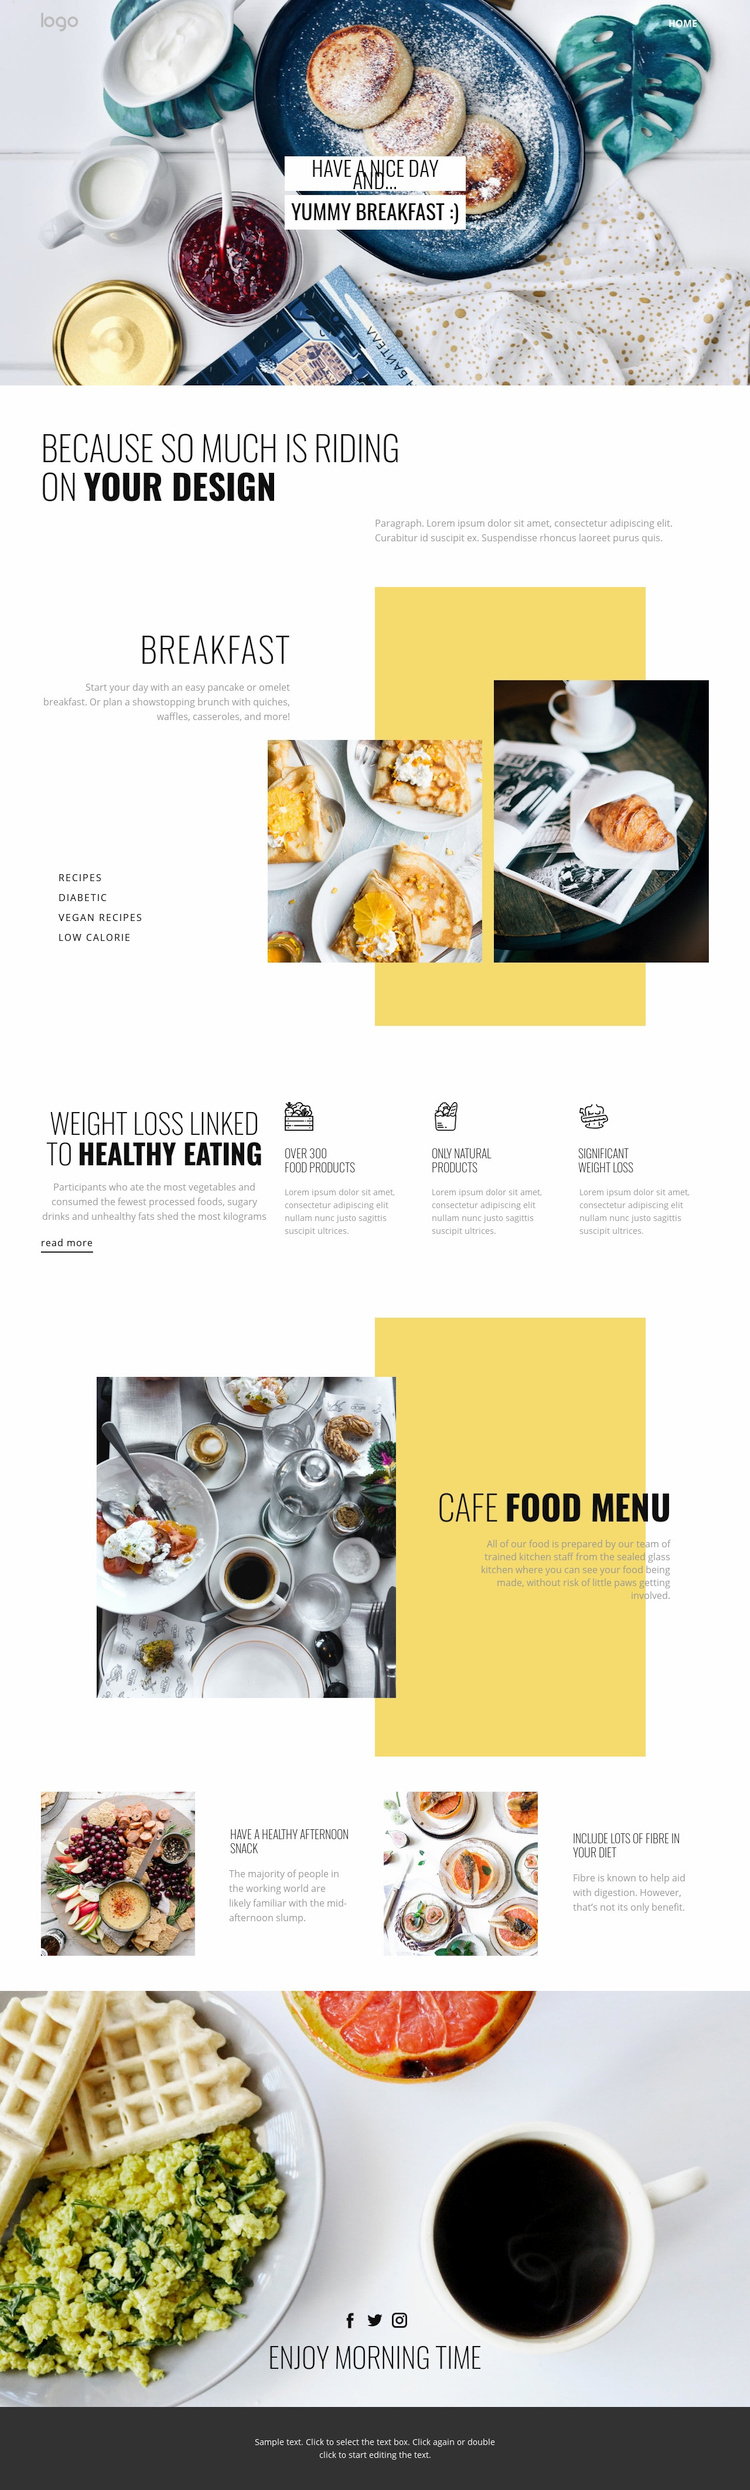 Healthy way of eating food Wix Template Alternative